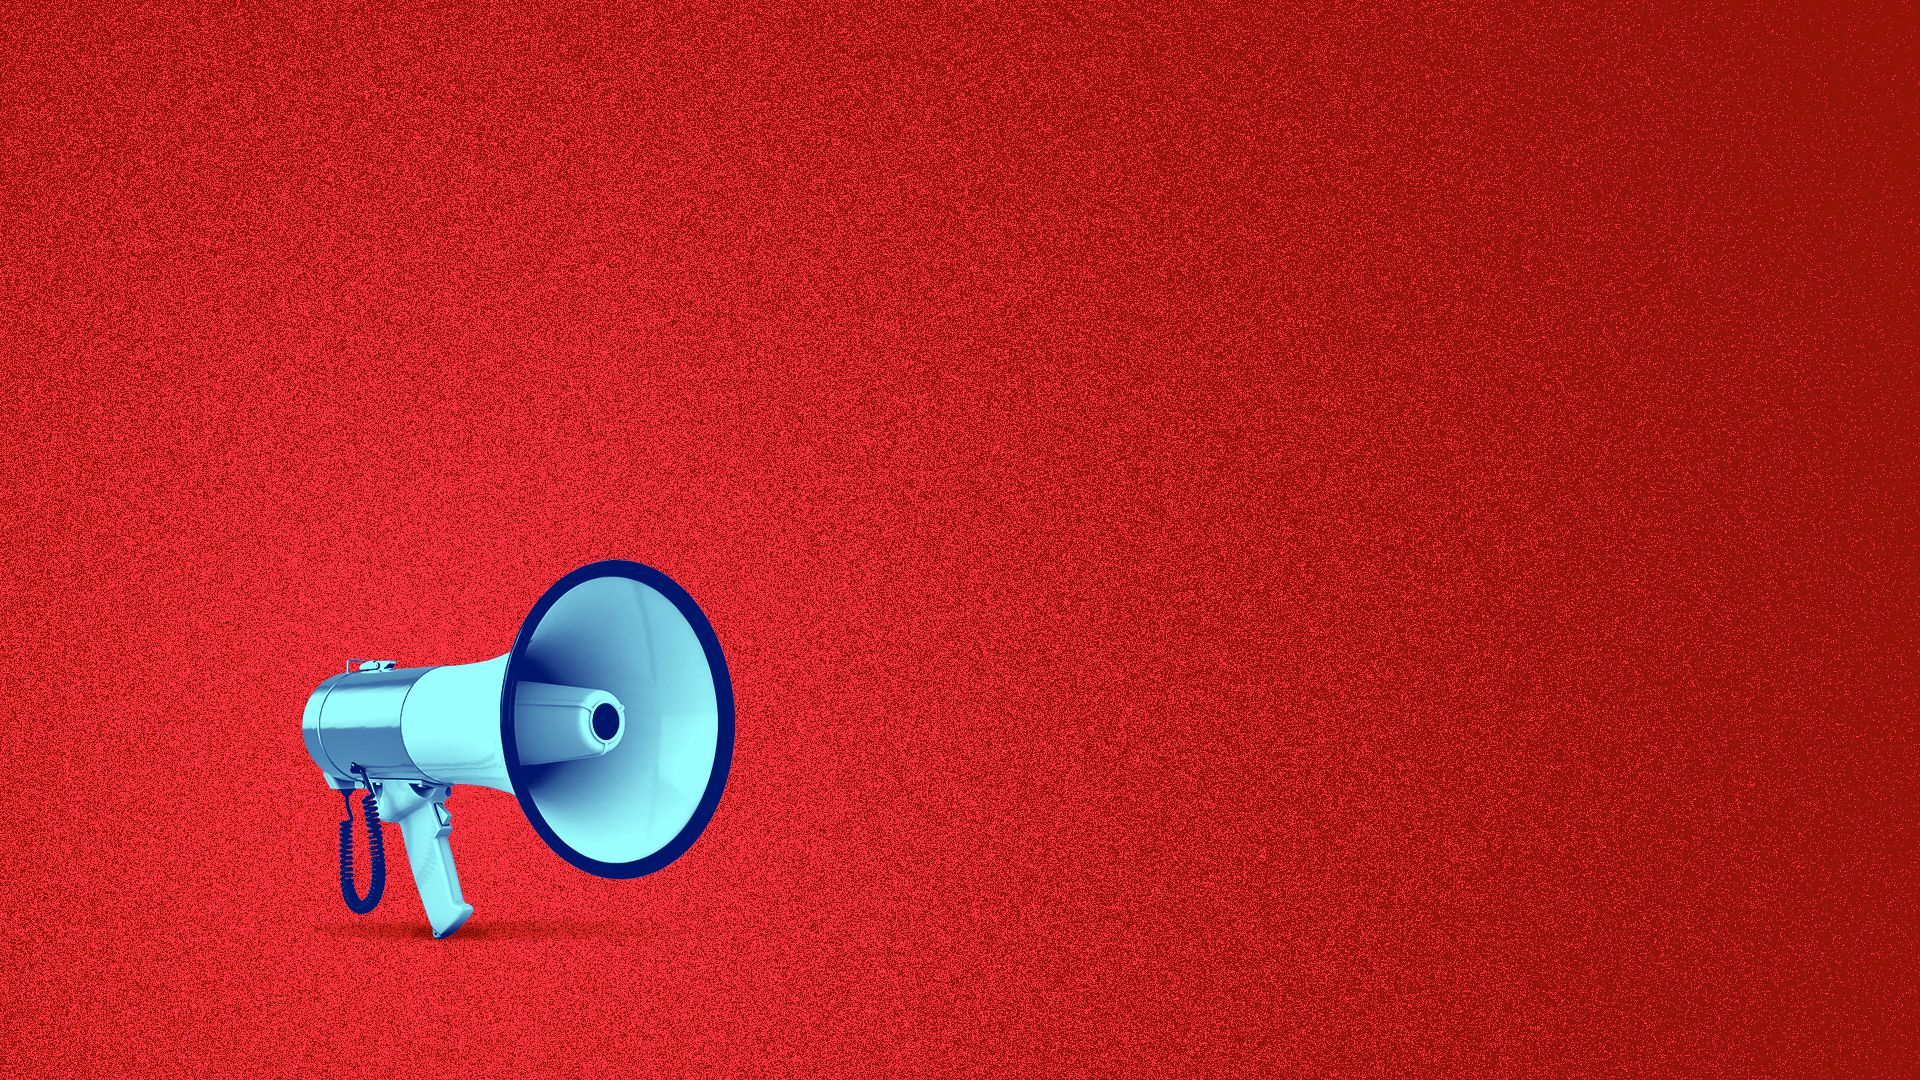 Illustration of a small blue megaphone against a red background.